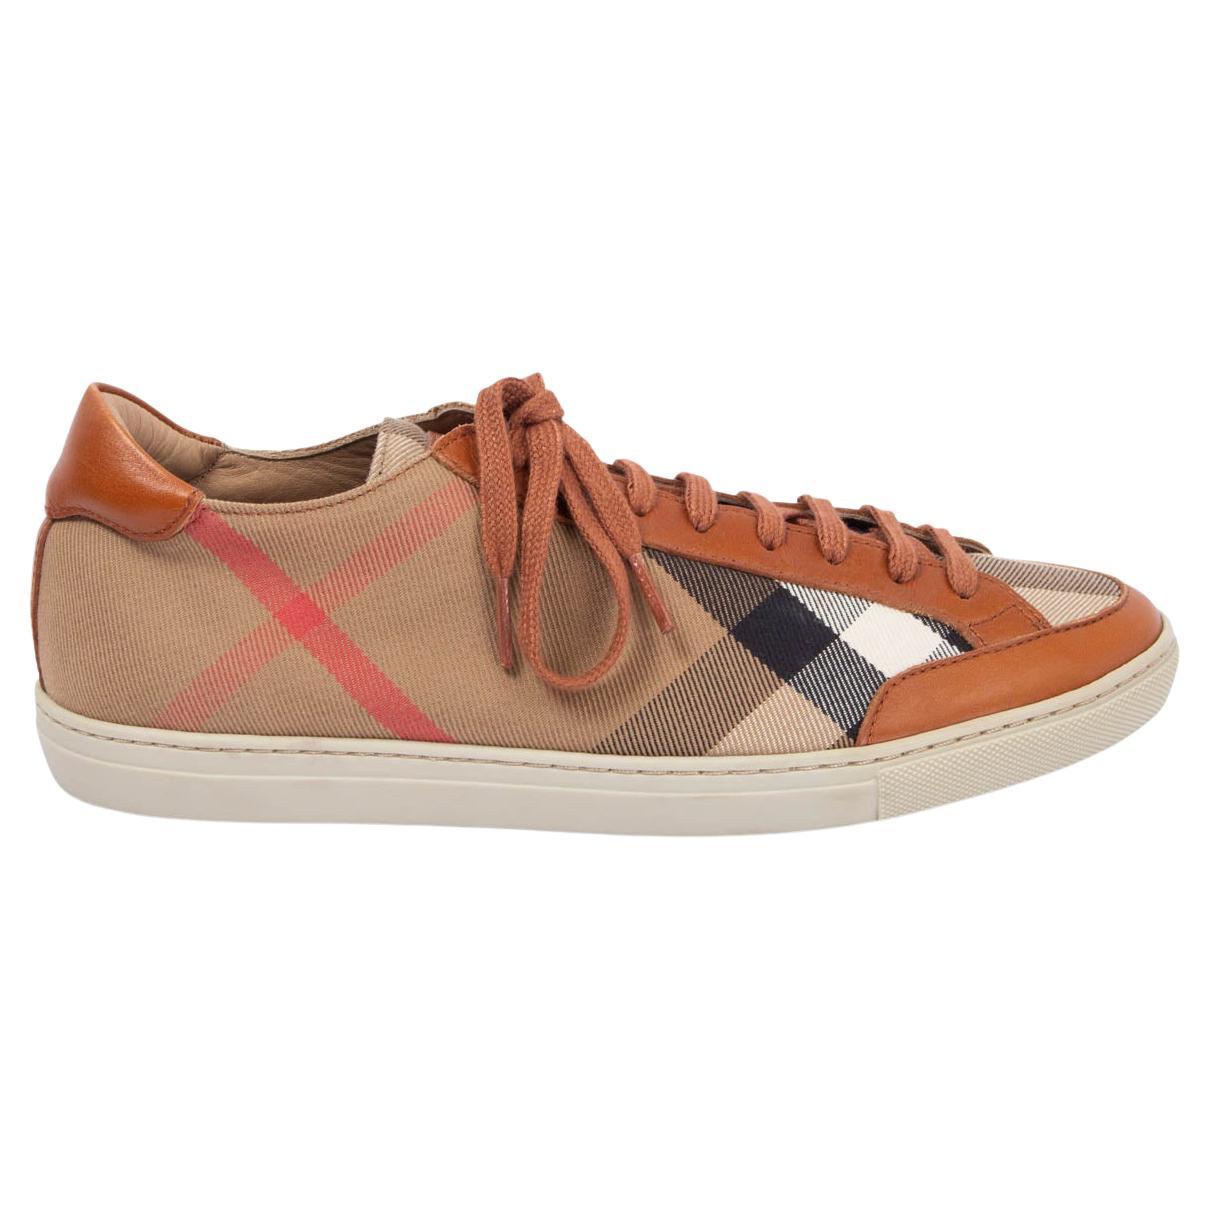 BURBERRY brown leather CLASSIC CHECK CANVAS Sneakers Shoes 39 For Sale